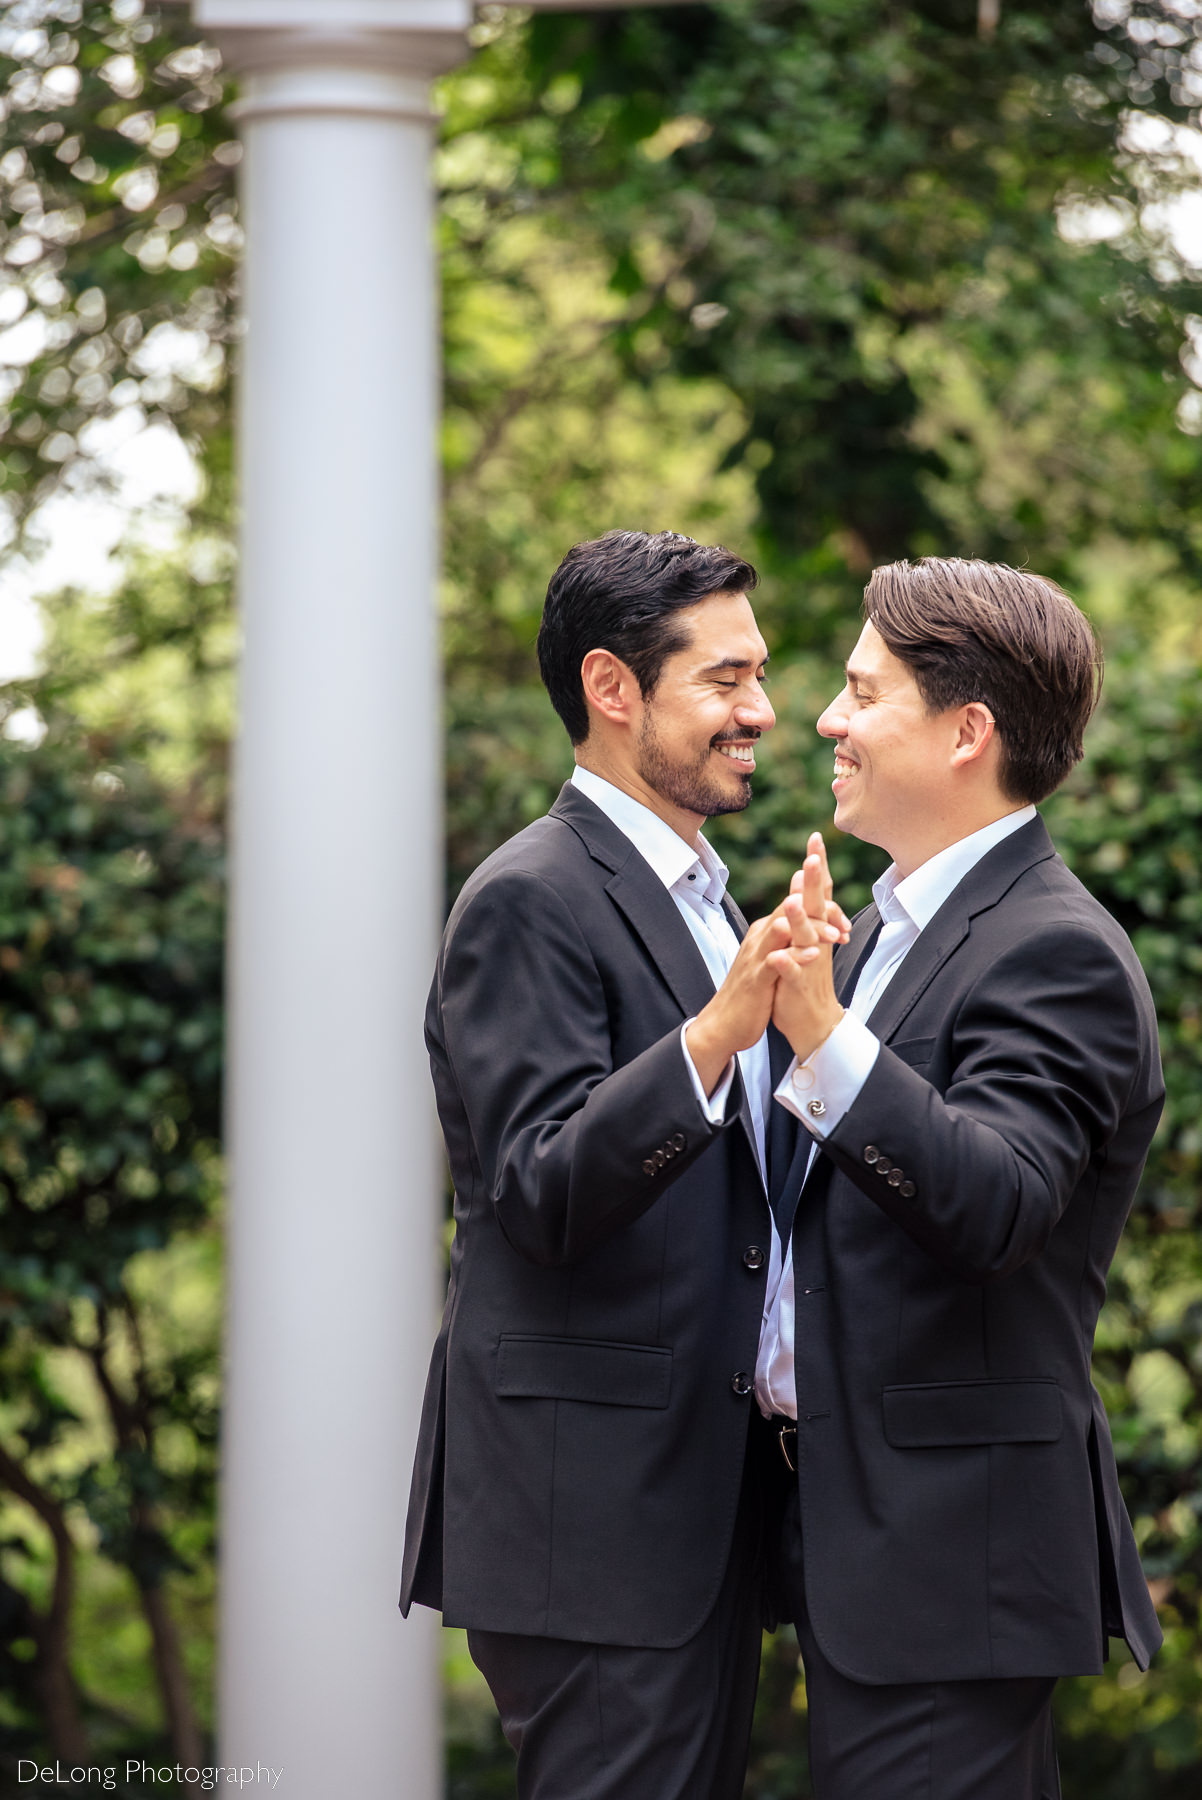 Candid moment of grooms laughing and smiling together dancing in the gardens of the Duke Mansion by Charlotte wedding photographers DeLong Photography